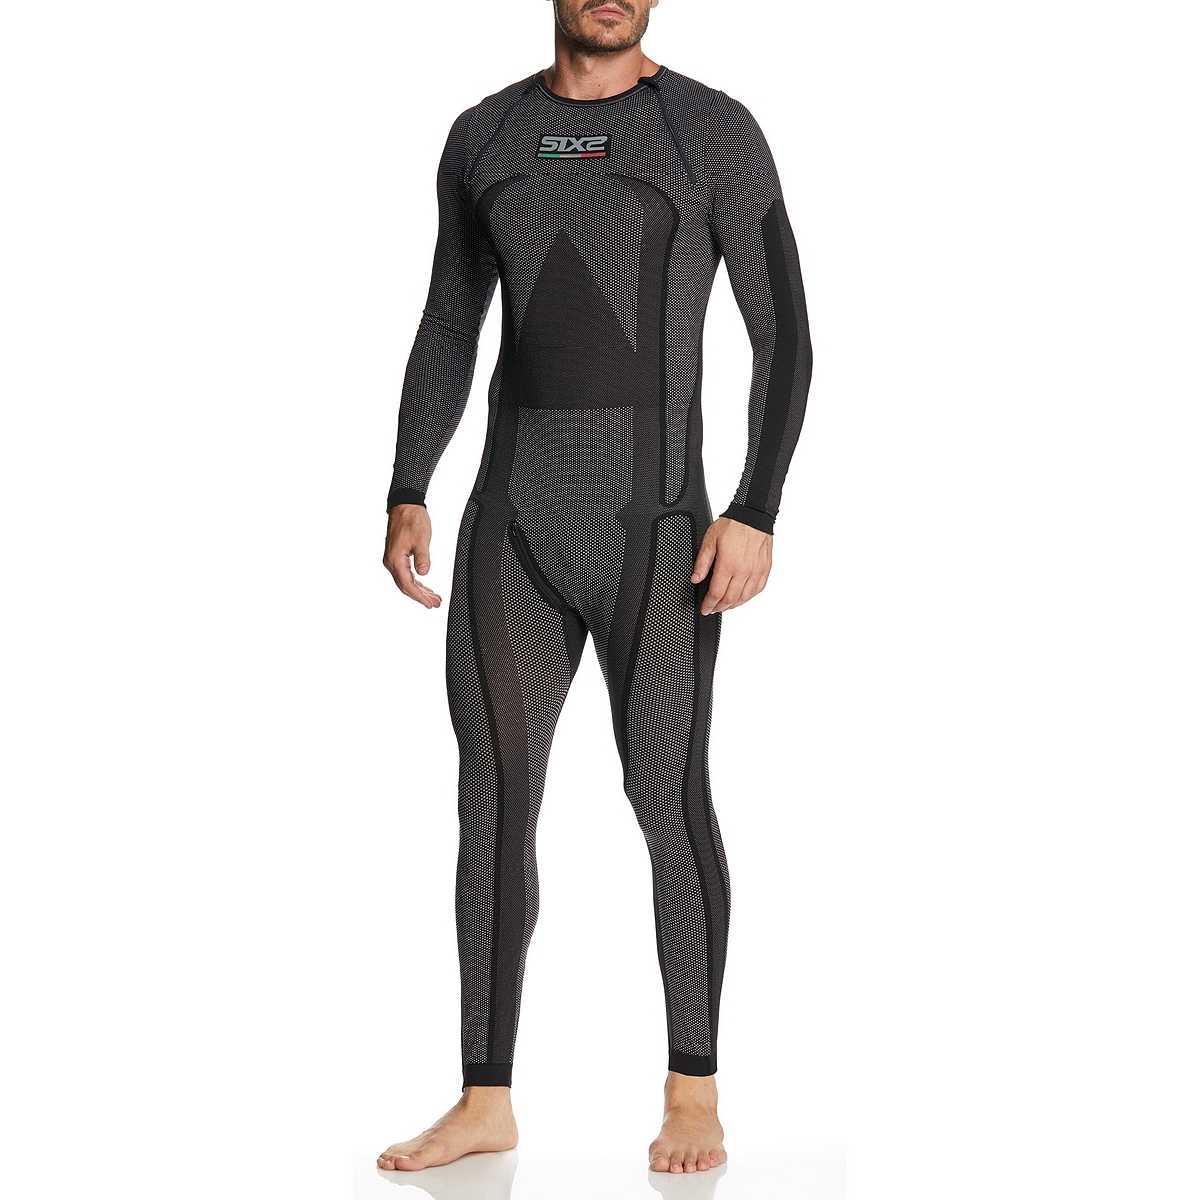 Undersuit Technical entire sleeved Sixs For Sale Online 